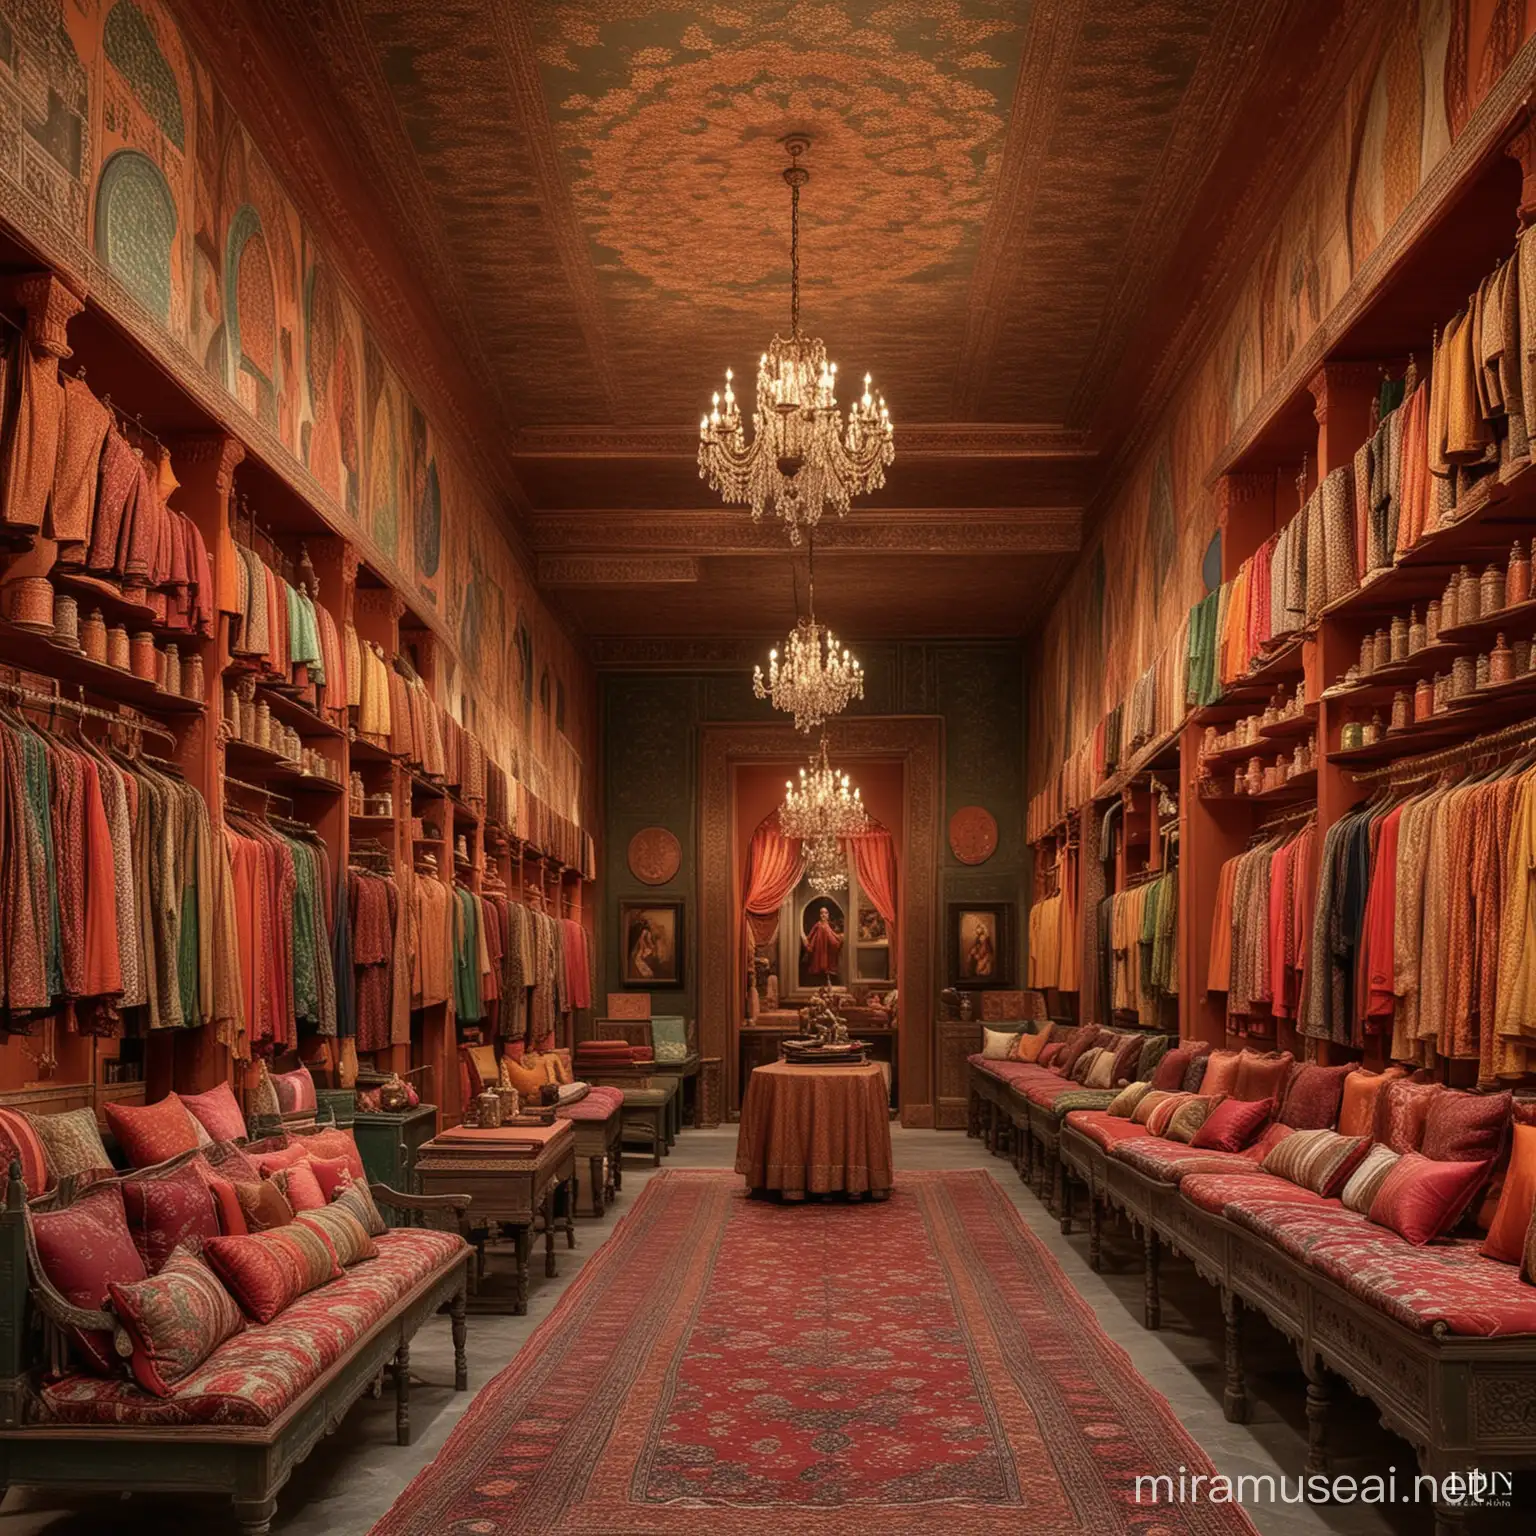 generate an image of a space for Sabyasachi's store with elements of Jaipur/rajasthan
